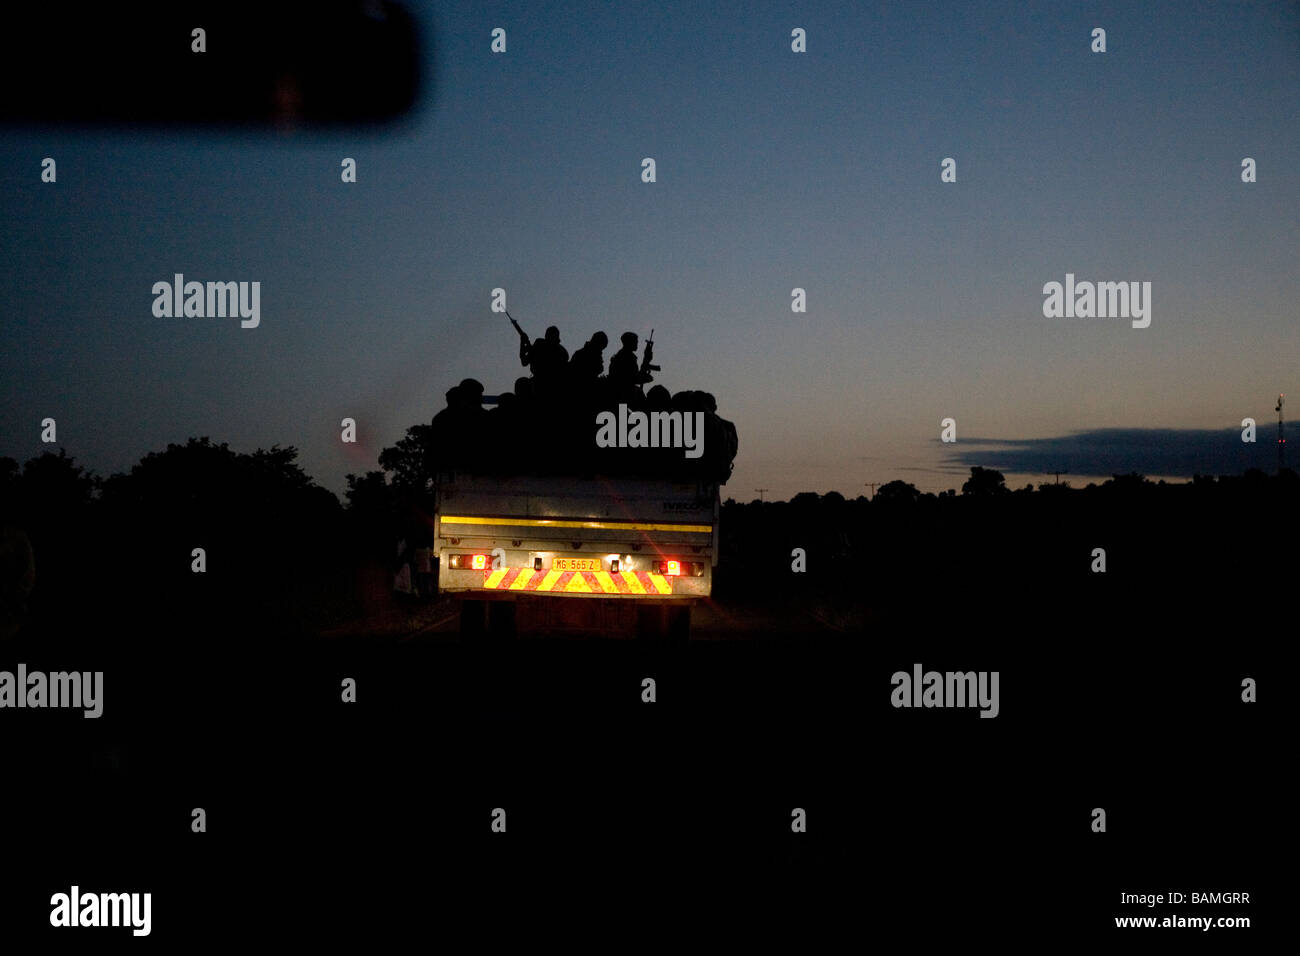 Military convoy protecting the President during electioneering, Malawi Stock Photo